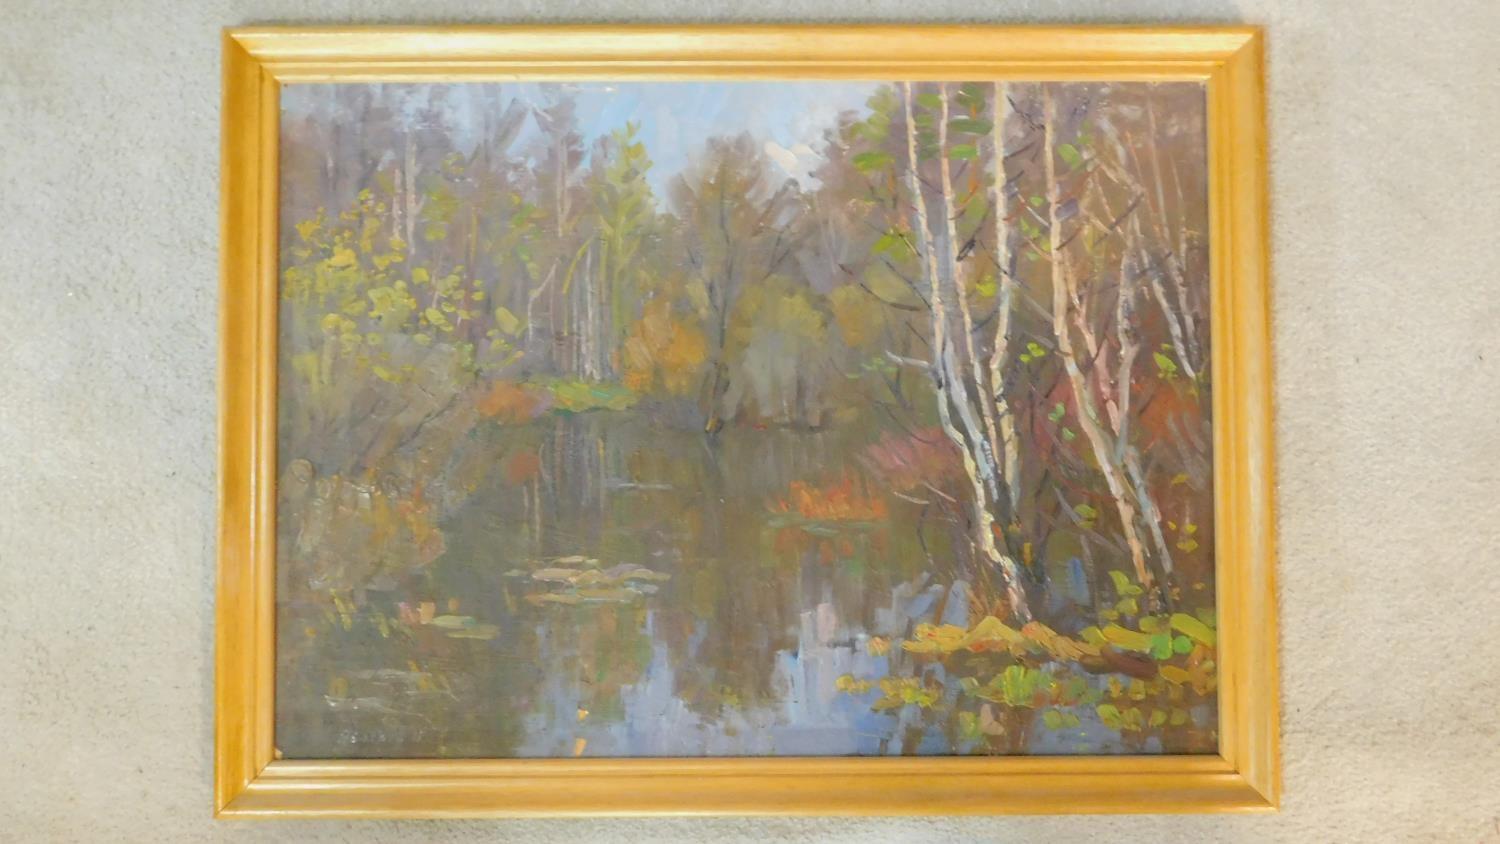 A framed oil on board, silver birches in a lakescape, signed in Russsian cyrillic, possibly N. - Image 2 of 6